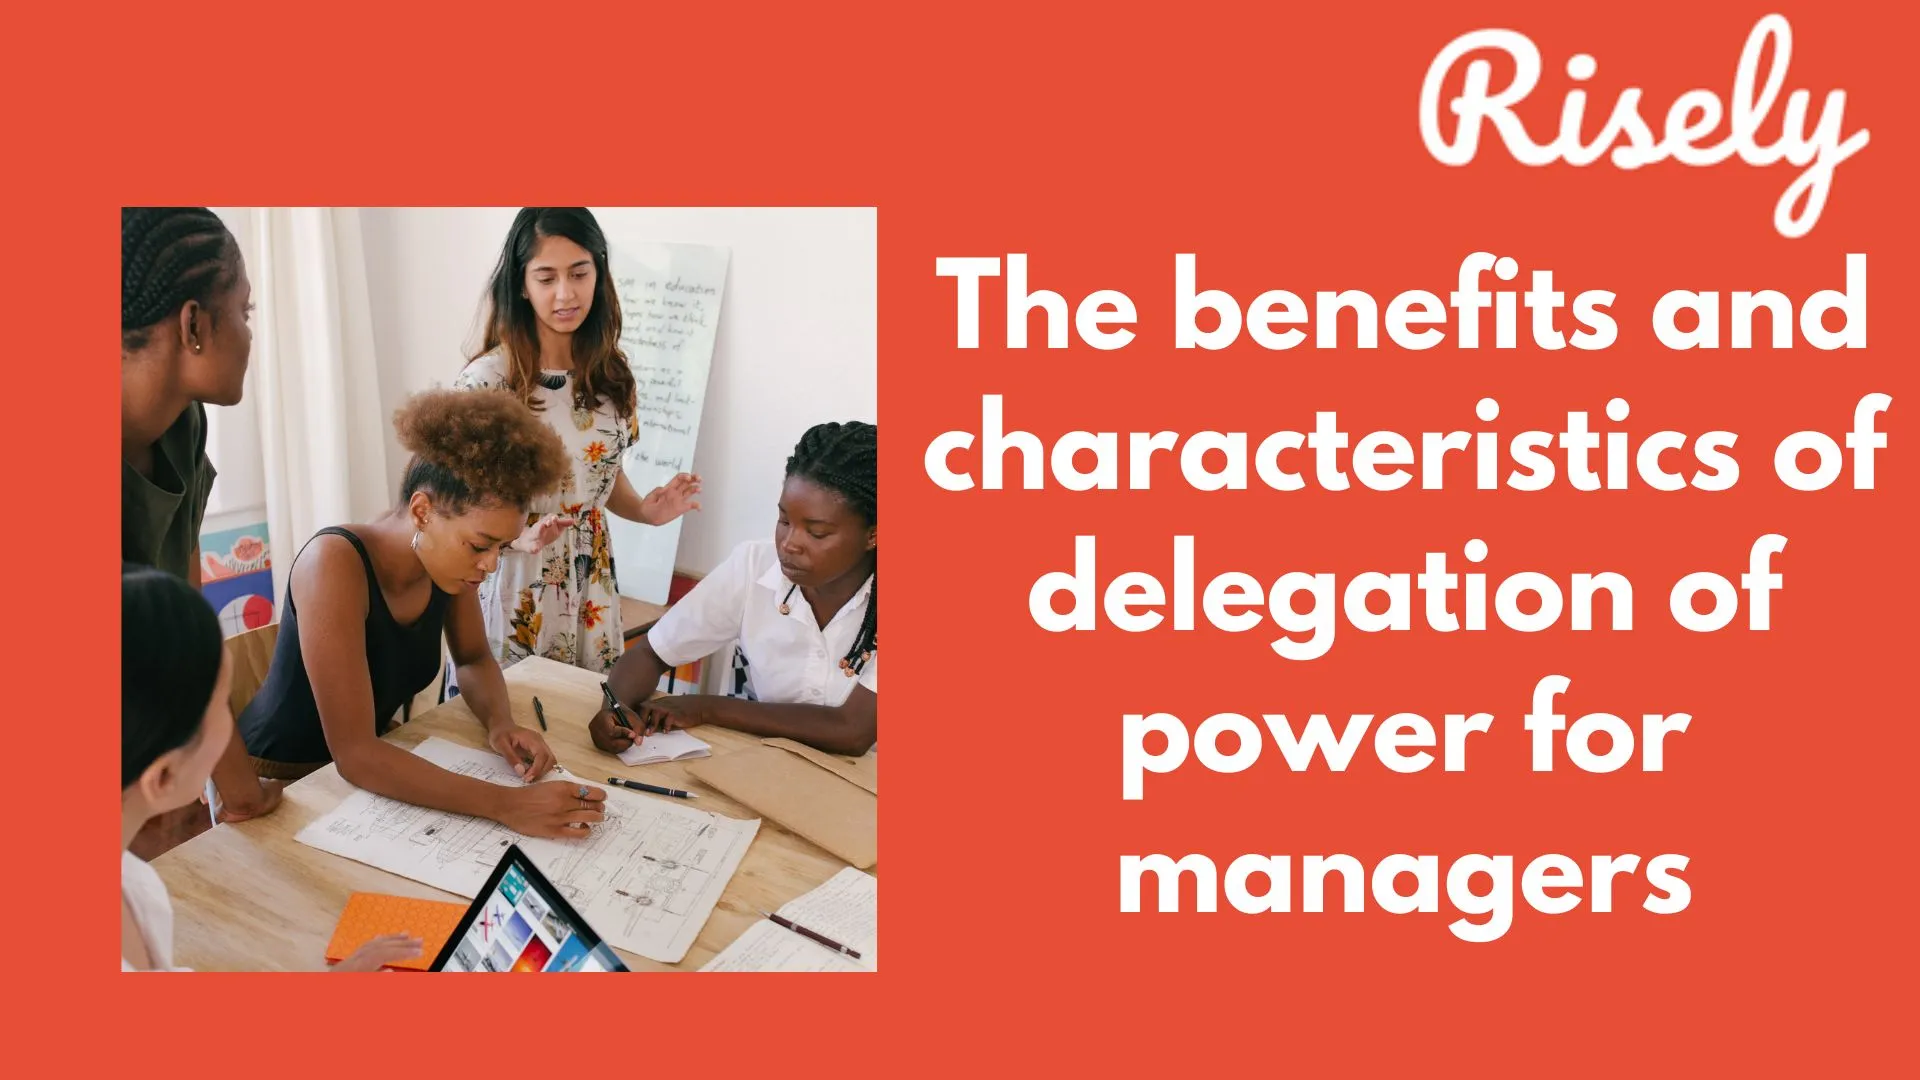 The benefits and characteristics of delegation of power for managers